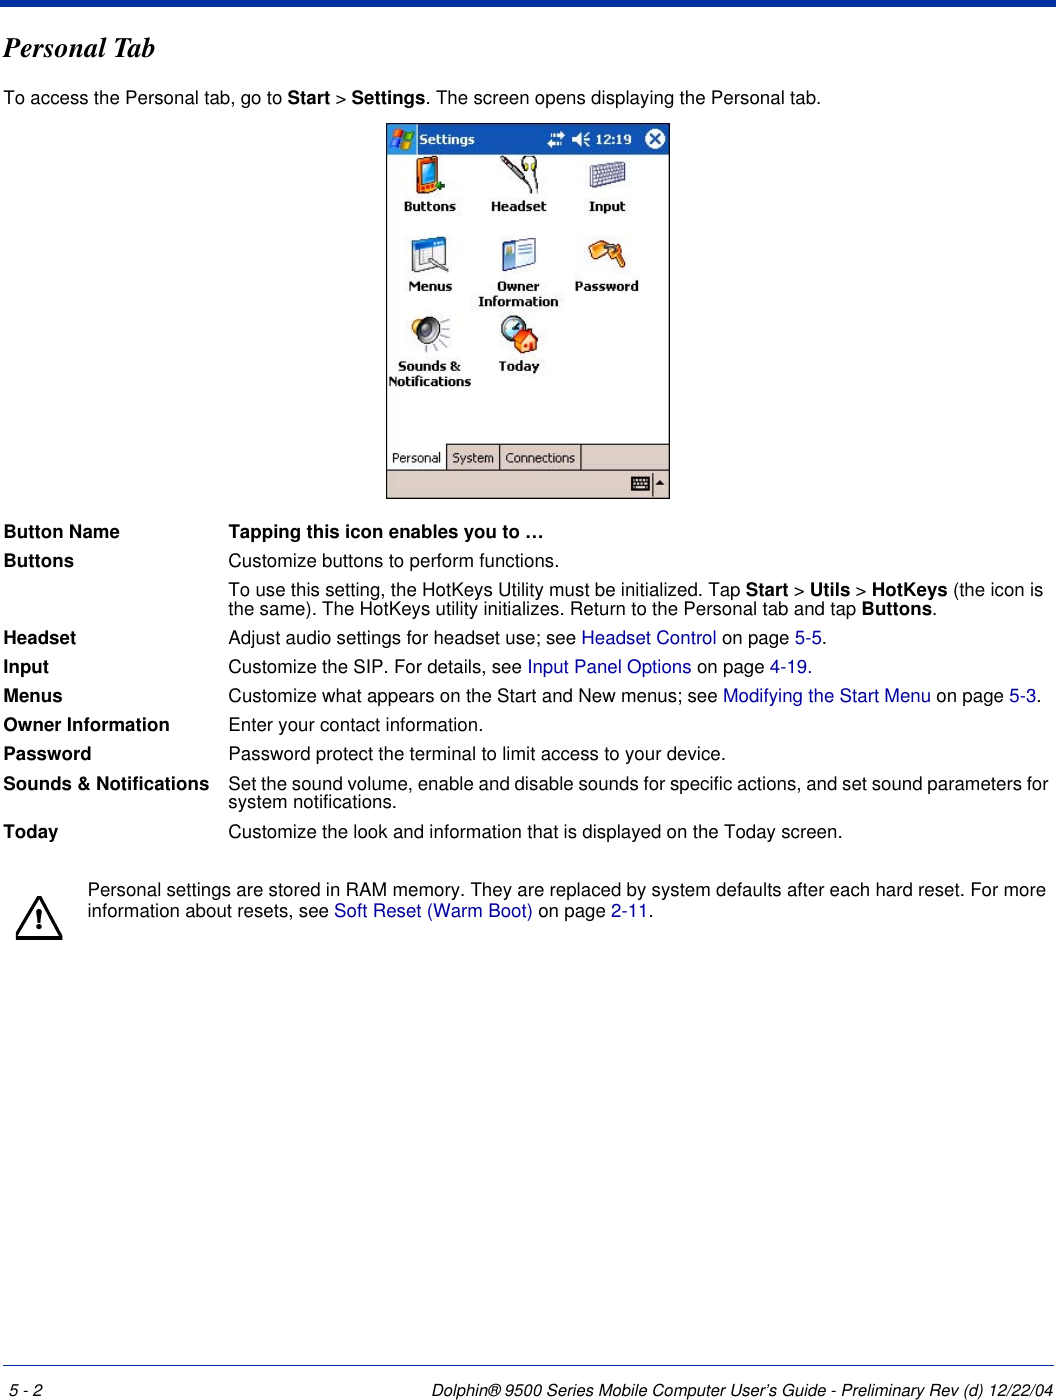 5 - 2 Dolphin® 9500 Series Mobile Computer User’s Guide - Preliminary Rev (d) 12/22/04Personal TabTo access the Personal tab, go to Start &gt; Settings. The screen opens displaying the Personal tab.Button Name Tapping this icon enables you to …Buttons Customize buttons to perform functions. To use this setting, the HotKeys Utility must be initialized. Tap Start &gt; Utils &gt; HotKeys (the icon is the same). The HotKeys utility initializes. Return to the Personal tab and tap Buttons.Headset Adjust audio settings for headset use; see Headset Control on page 5-5.Input Customize the SIP. For details, see Input Panel Options on page 4-19.Menus Customize what appears on the Start and New menus; see Modifying the Start Menu on page 5-3. Owner Information Enter your contact information.Password Password protect the terminal to limit access to your device. Sounds &amp; Notifications Set the sound volume, enable and disable sounds for specific actions, and set sound parameters for system notifications.Today Customize the look and information that is displayed on the Today screen.Personal settings are stored in RAM memory. They are replaced by system defaults after each hard reset. For more information about resets, see Soft Reset (Warm Boot) on page 2-11.!